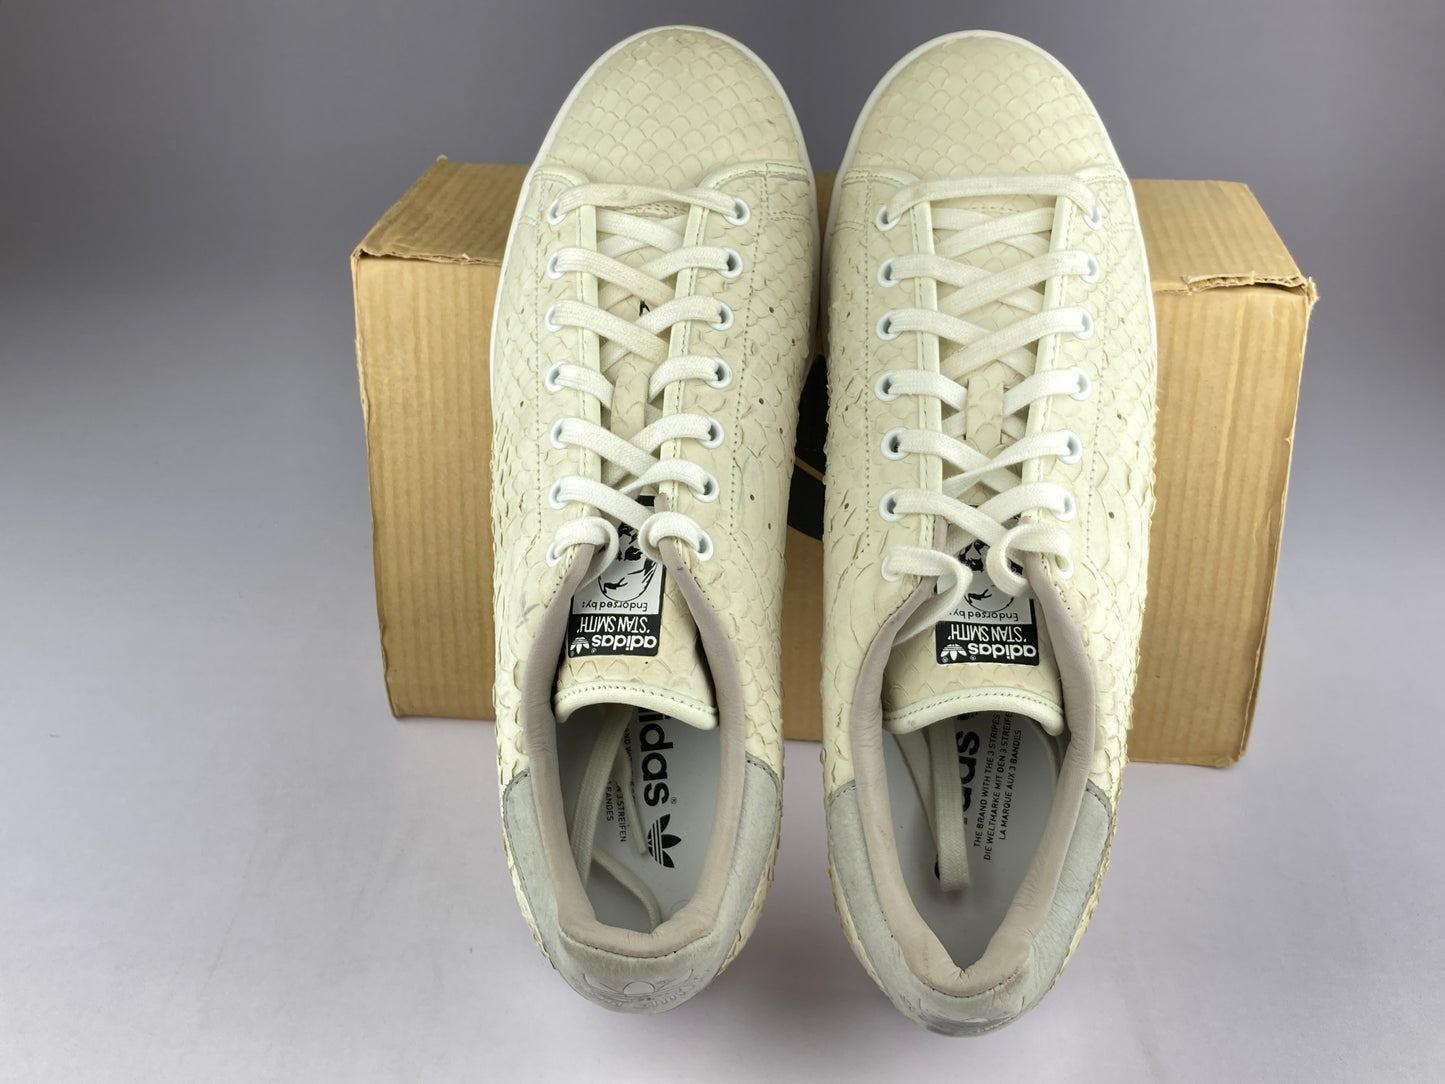 adidas Stan Smith Deconstructed Flat 'White Python' s80504-Sneakers-Athletic Corner